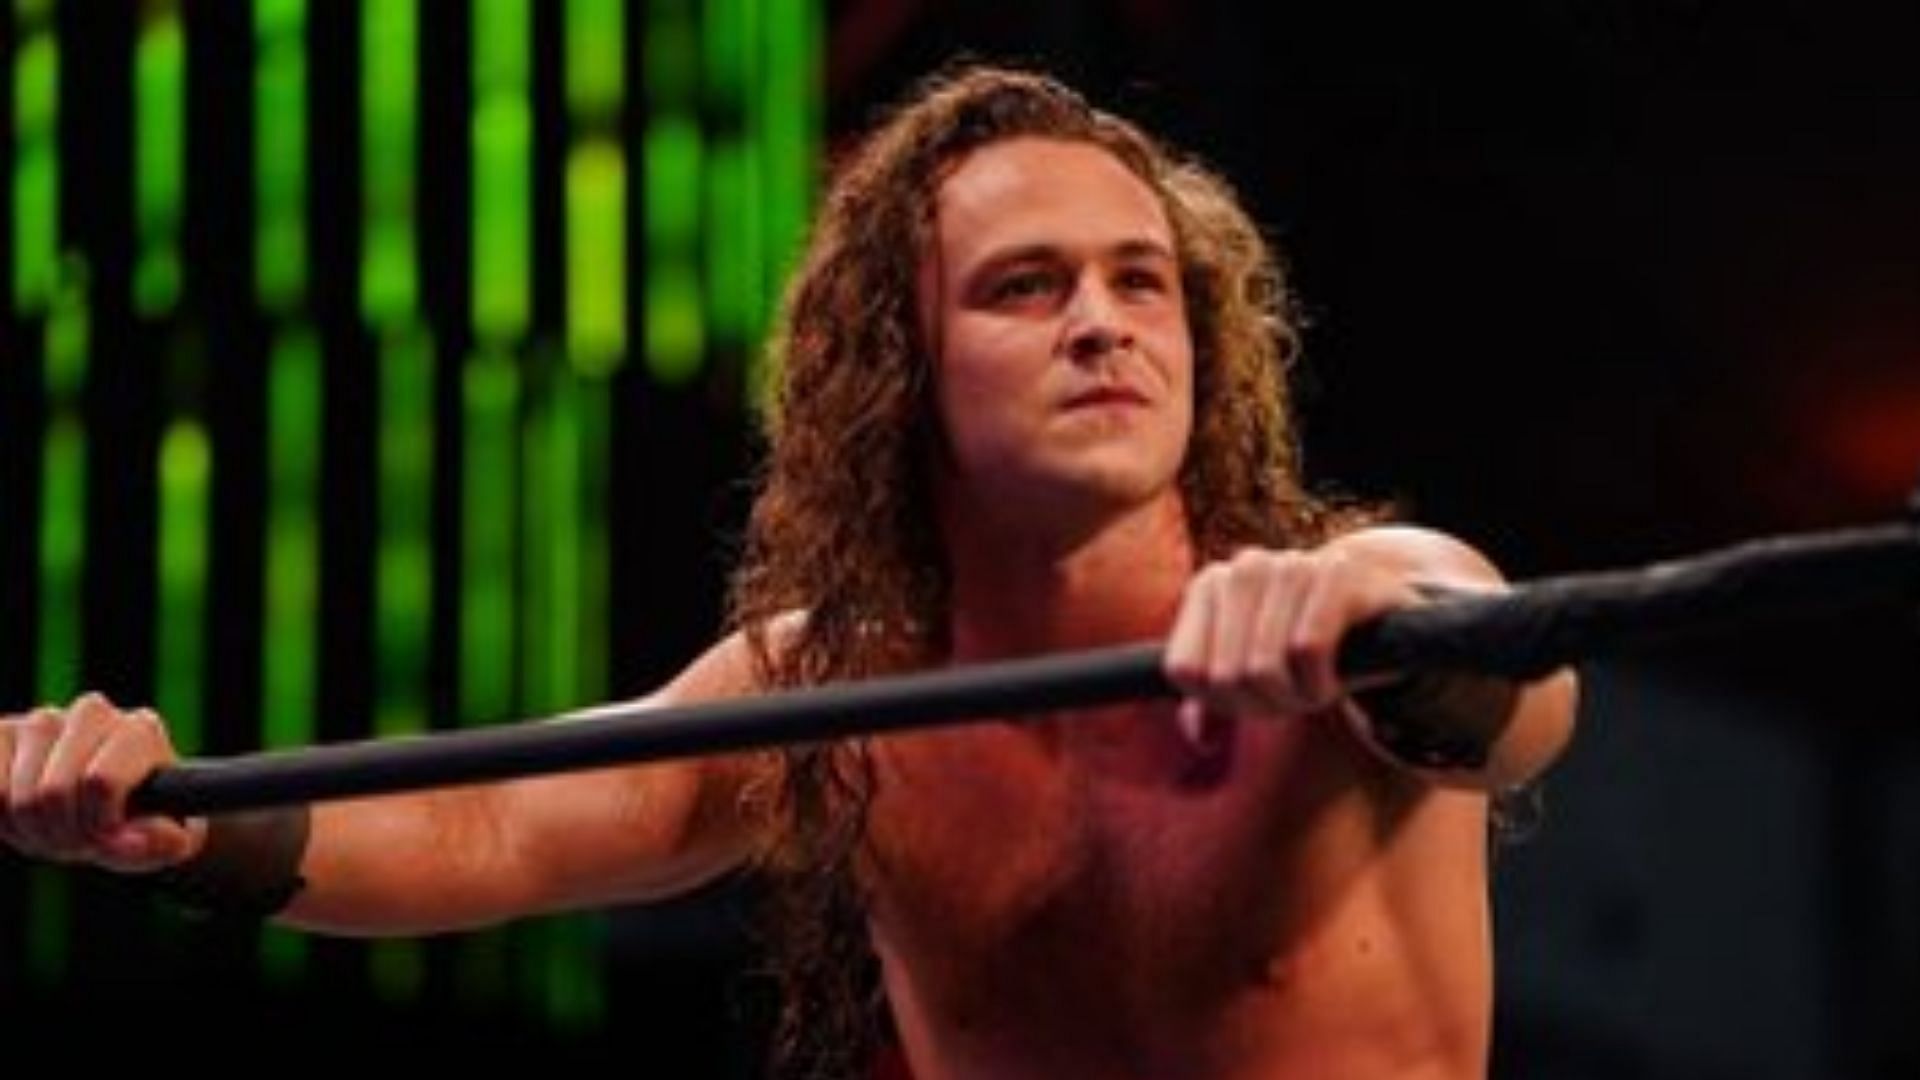 Jungle Boy has not been seen since he was savagely attacked on AEW Dynamite